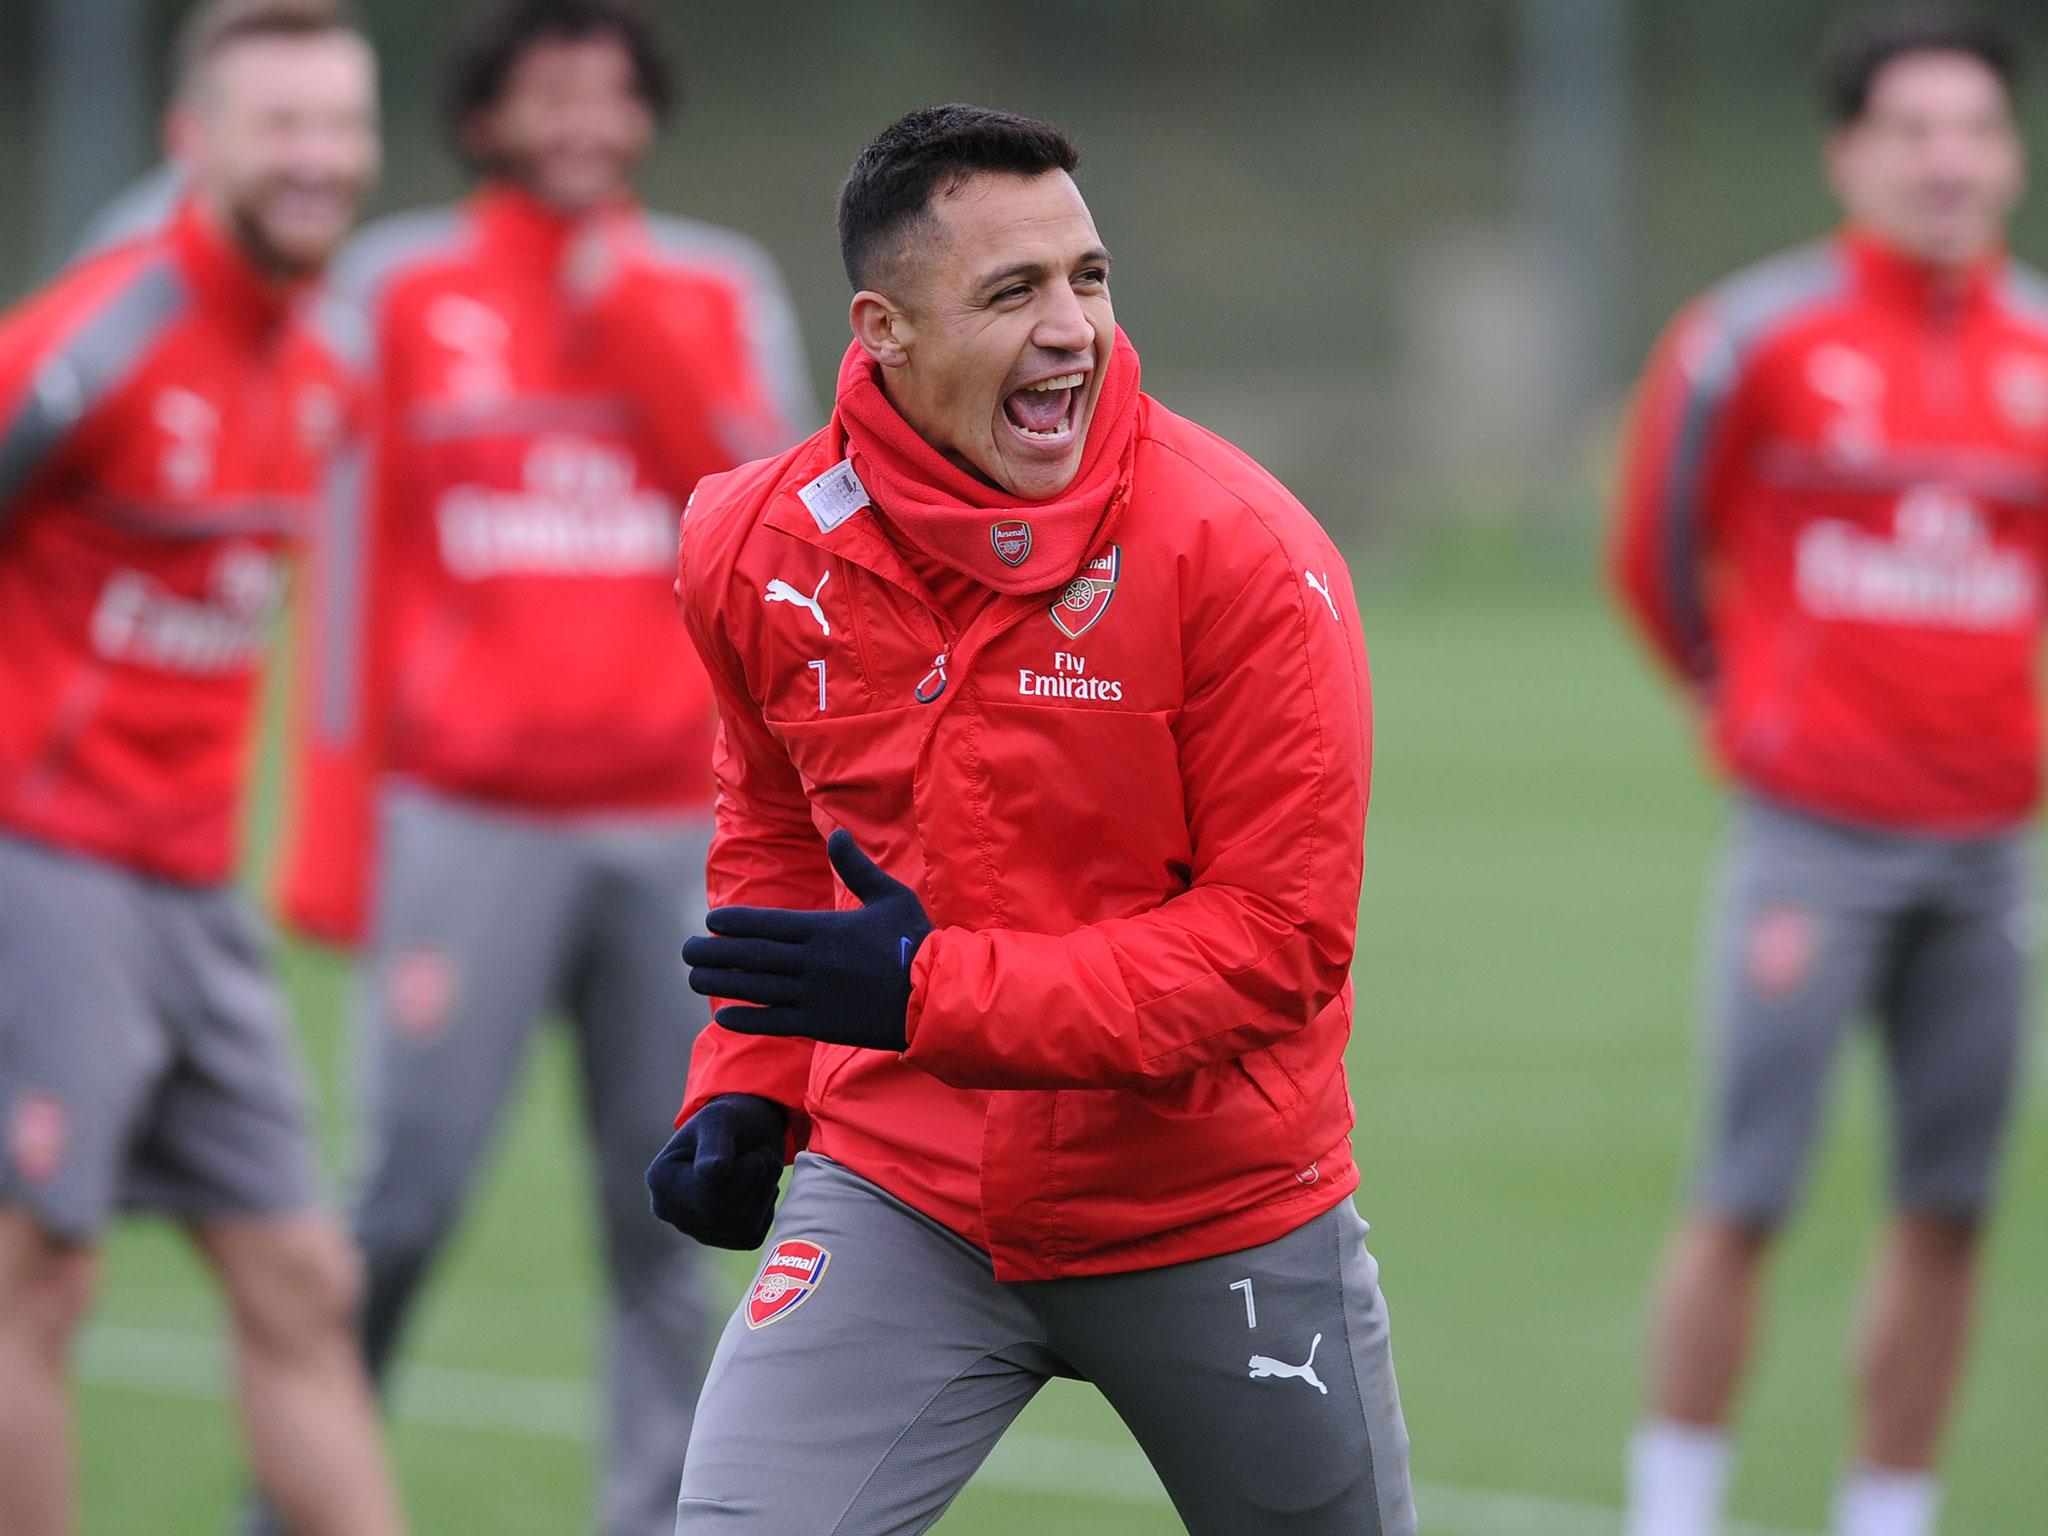 Alexis Sanchez will inform Arsene Wenger if he is fit to start for Arsenal against Manchester United